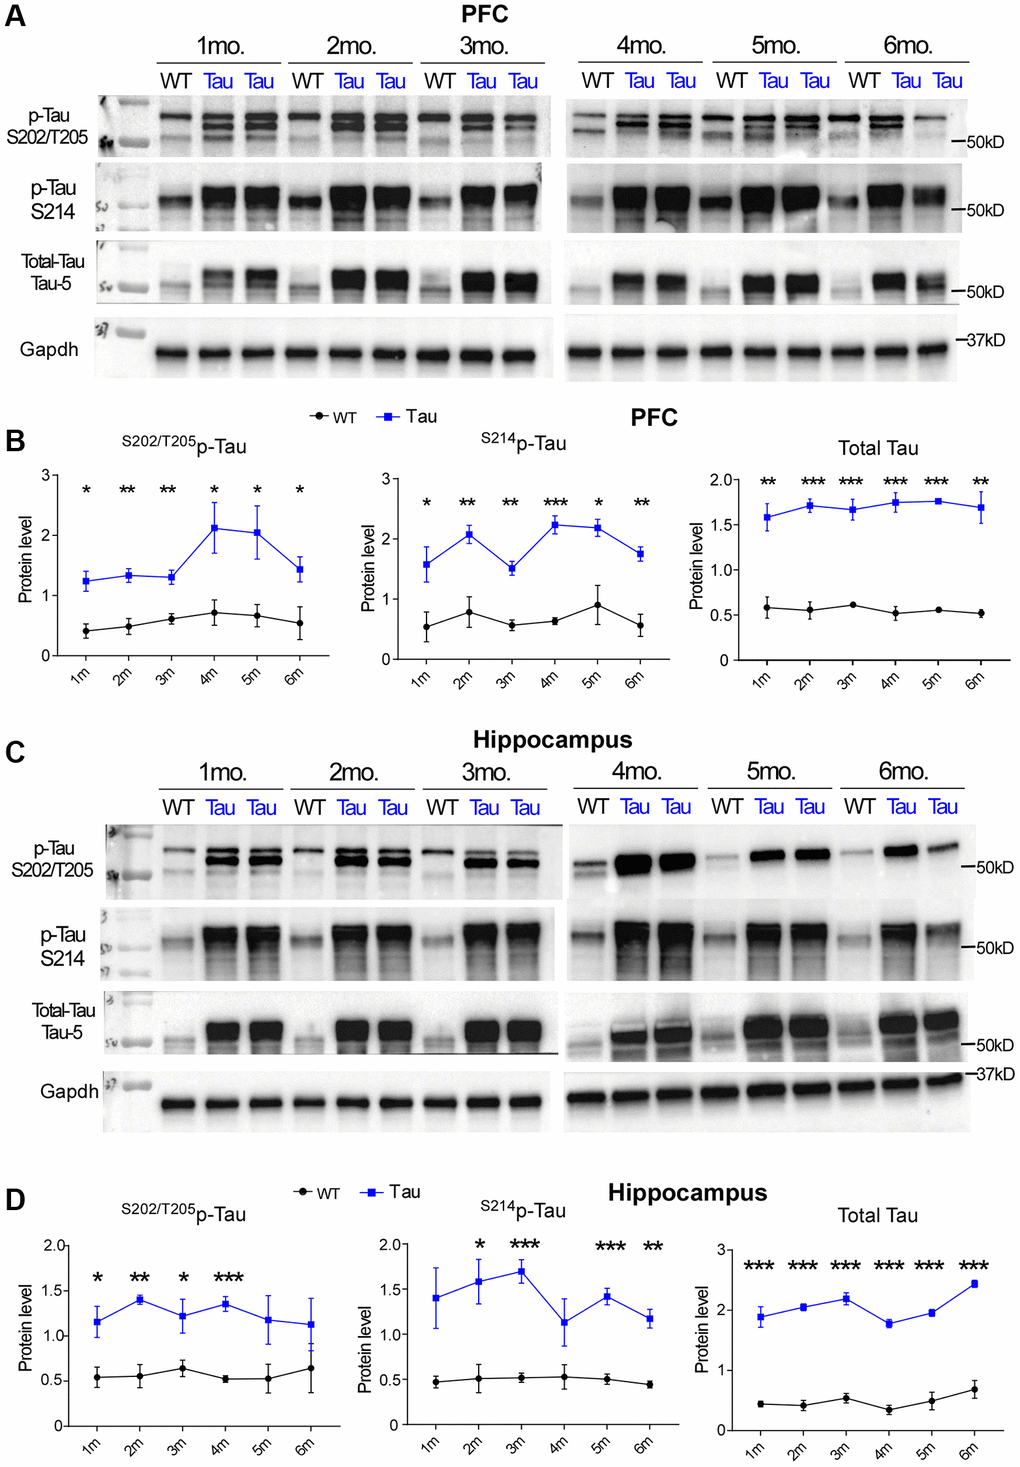 High expression of hyperphosphorylated tau and total tau was found in P301S Tau mice from early ages. (A, C) Representative Western blots showing S202/T205p-tau, S214p-tau and total tau in PFC (A) and Hippocampus (C) of WT vs. P301S transgenic mice (WT: n = 3, P301S: n = 4) at 1 month to 6 months of age. (B, D) Plots of quantification data of S202/T205p-tau, S214p-tau and total tau (normalized to GAPDH) in PFC (B) and Hippocampus (D) of WT vs. P301S mice at various ages. At each time point, *p **p ***p t-test.